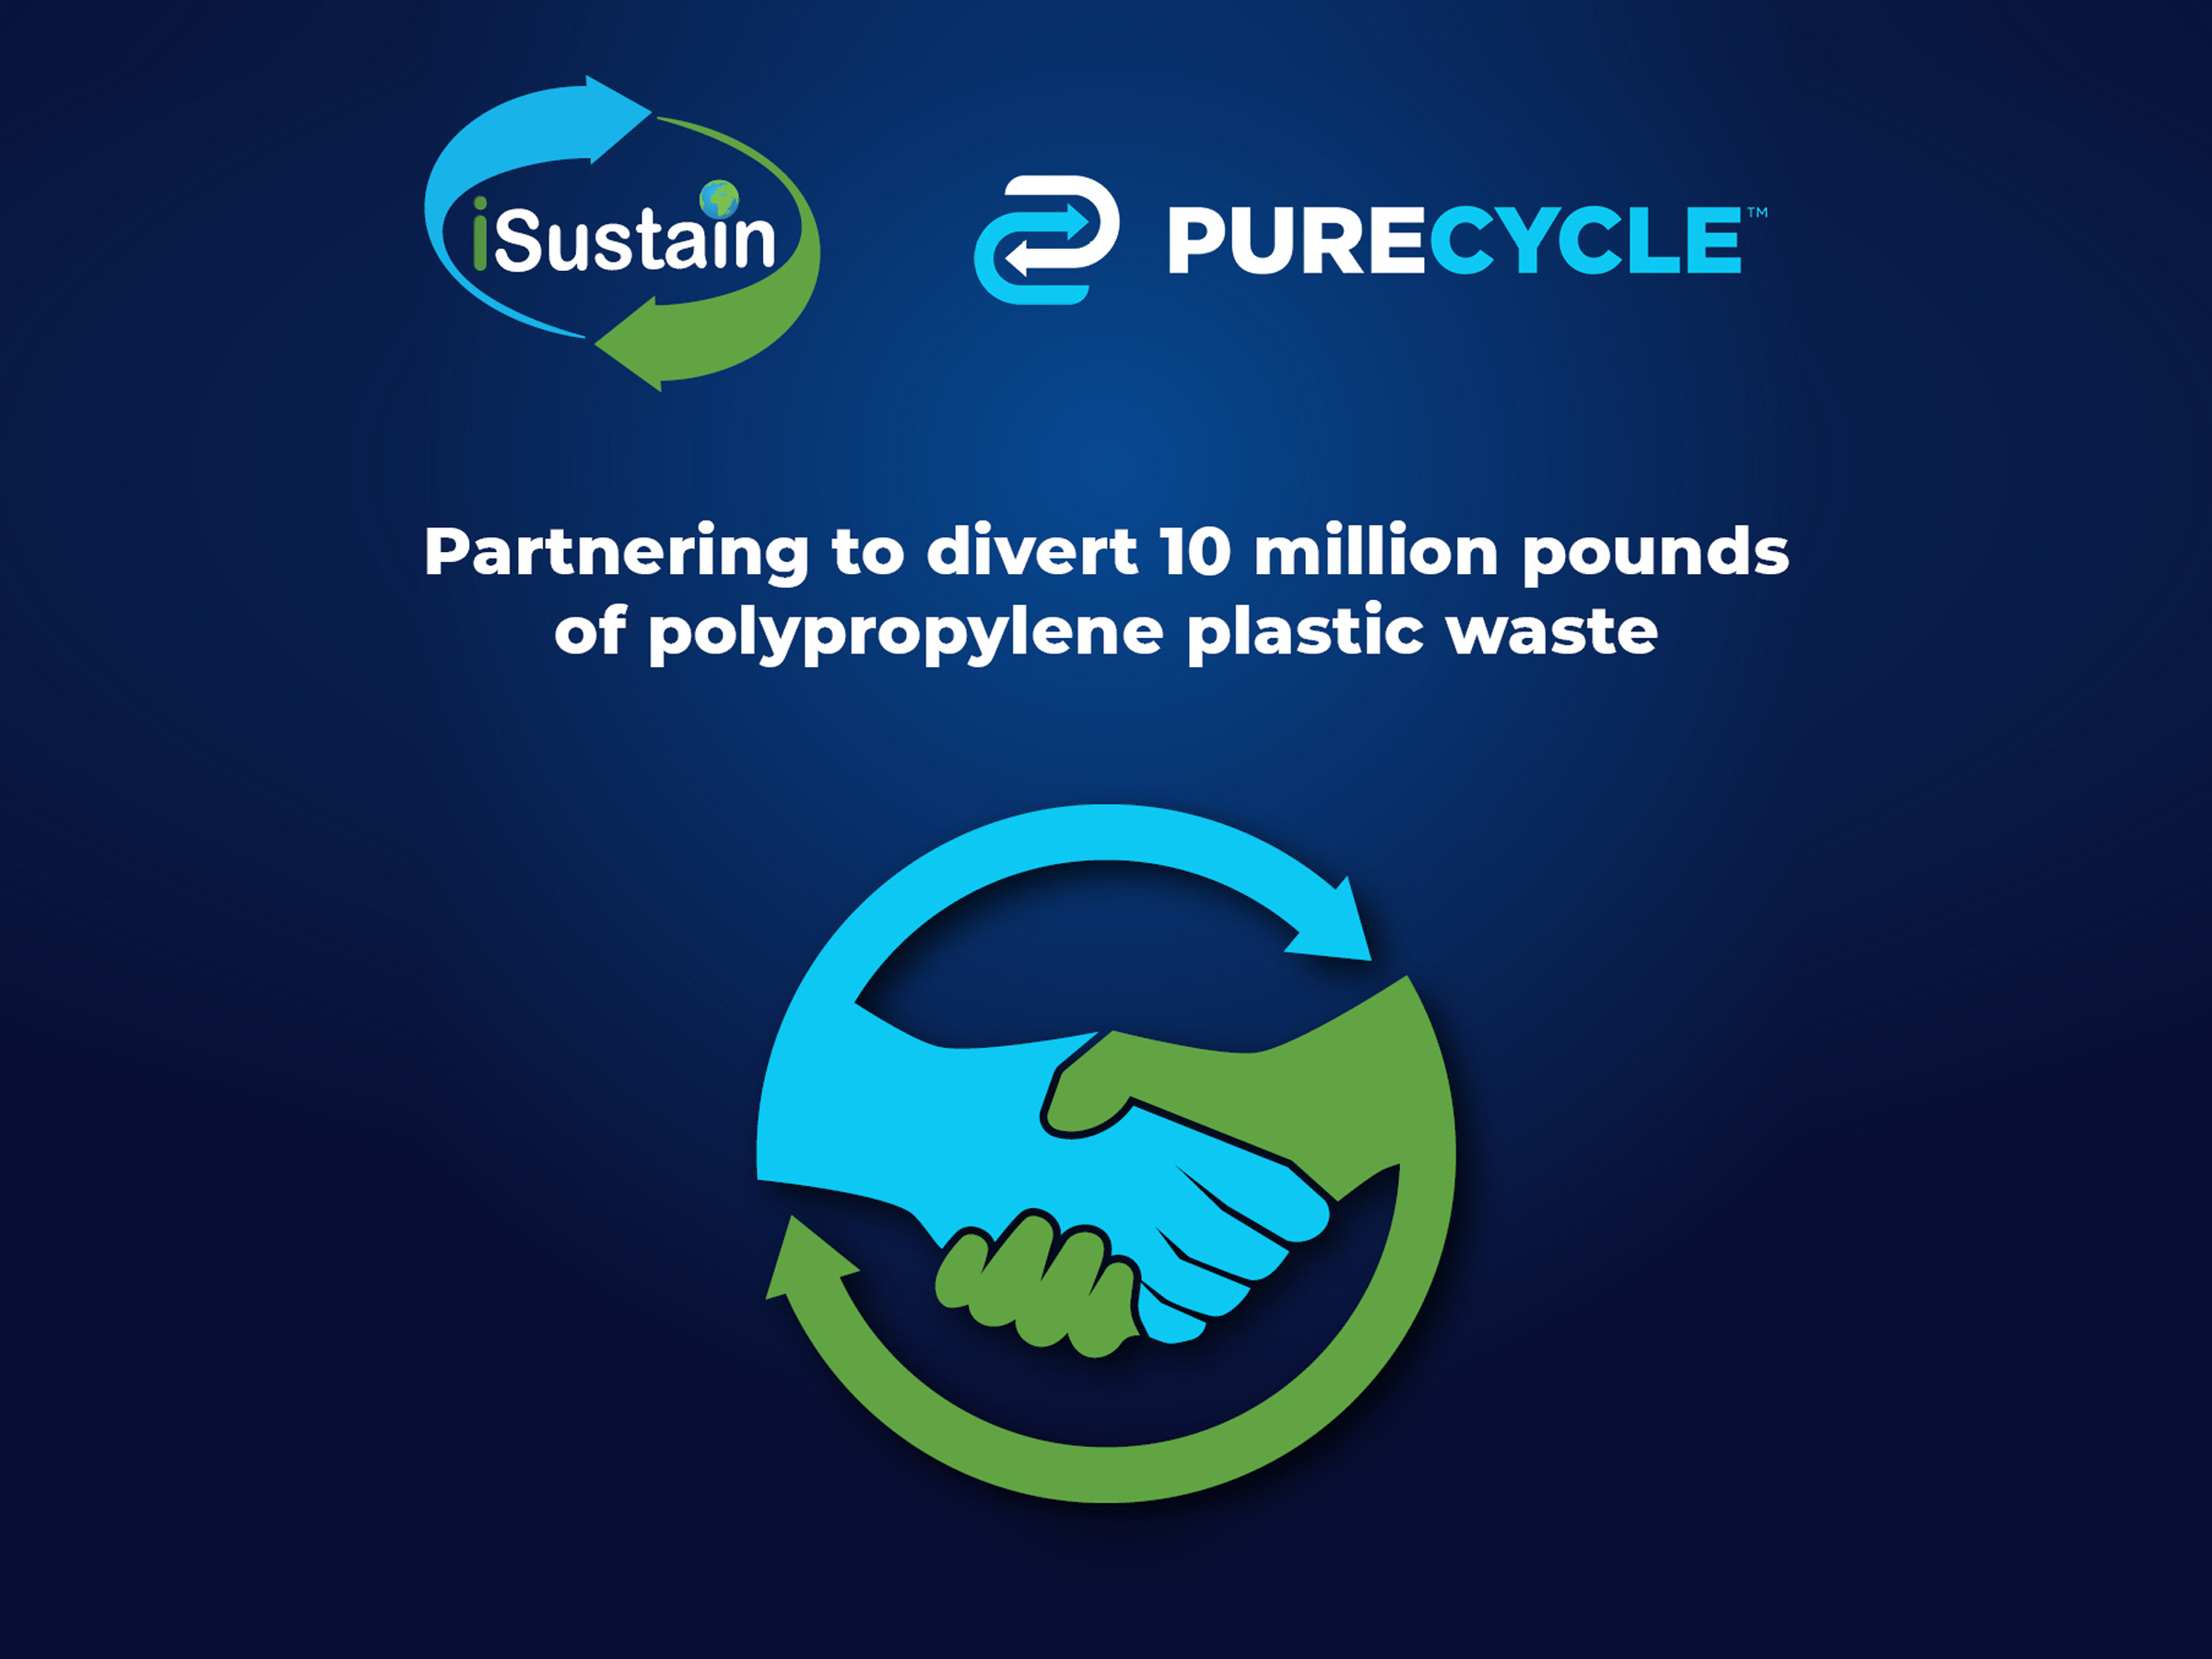 Up to Ten Million Pounds of Feedstock to be Provided to PureCycle Technologies